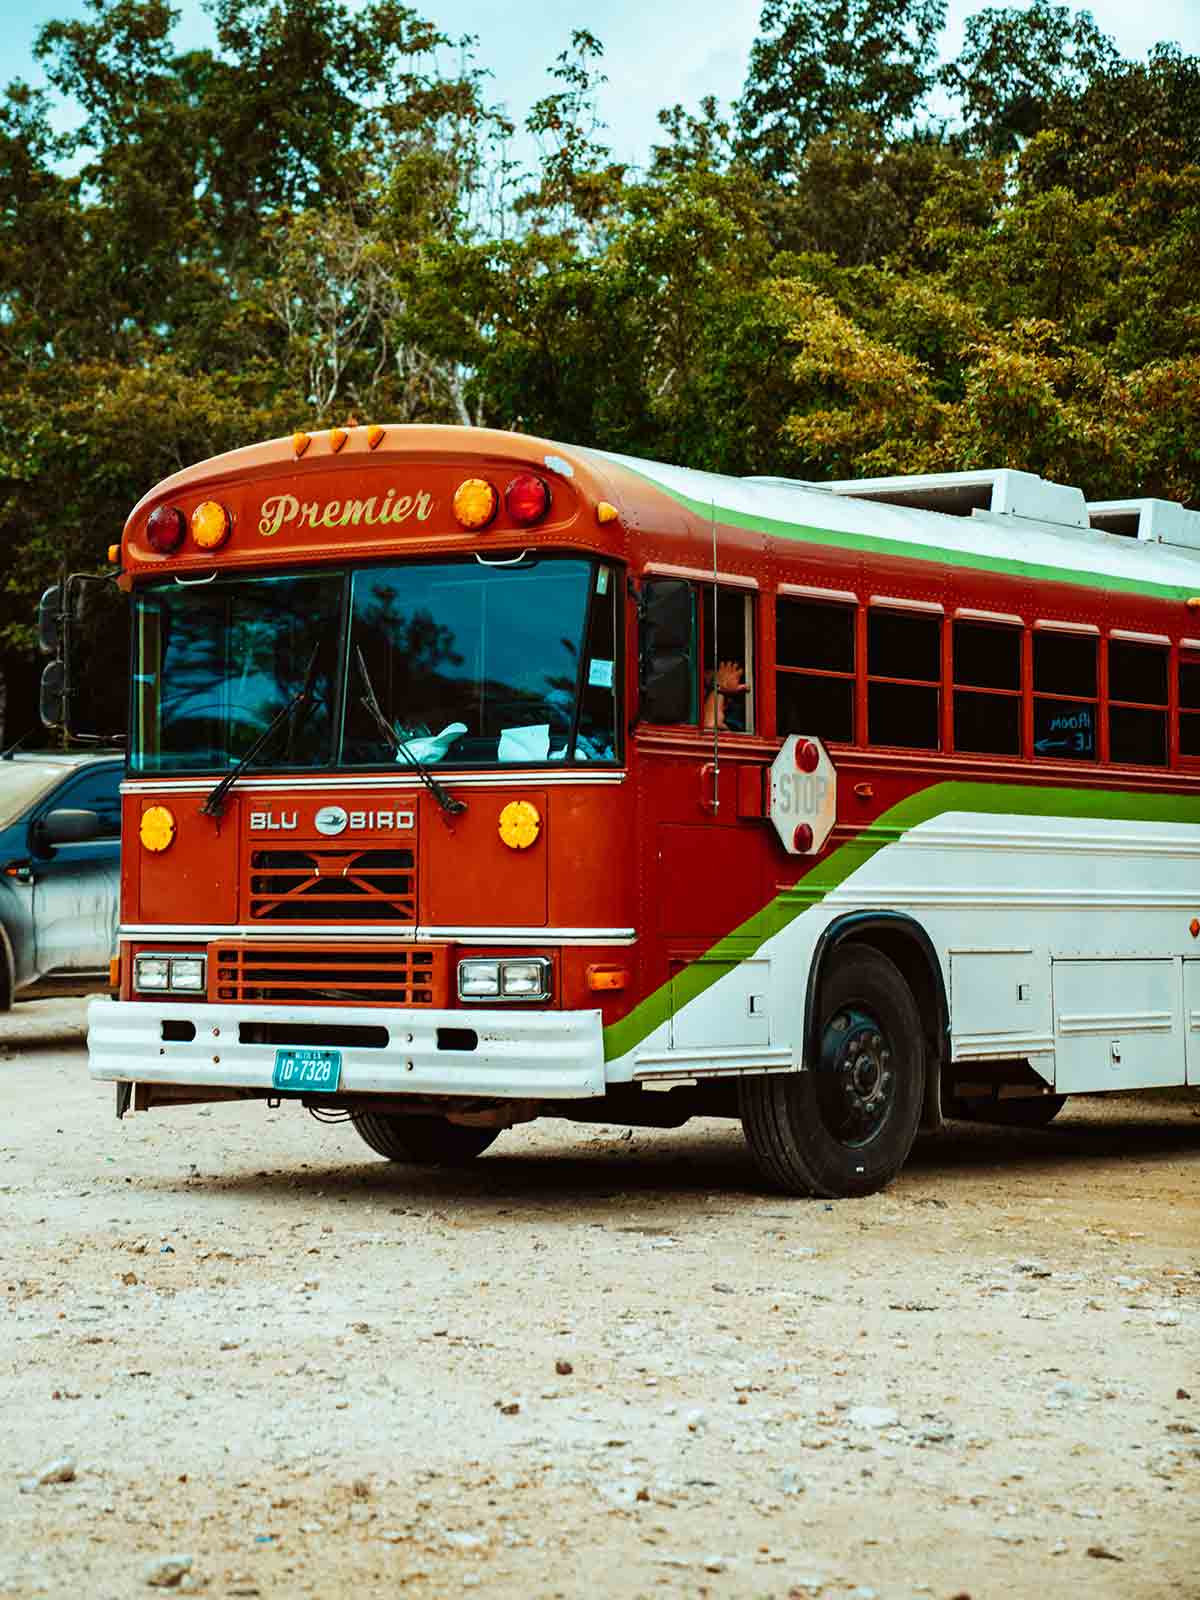 A local bus in Belize